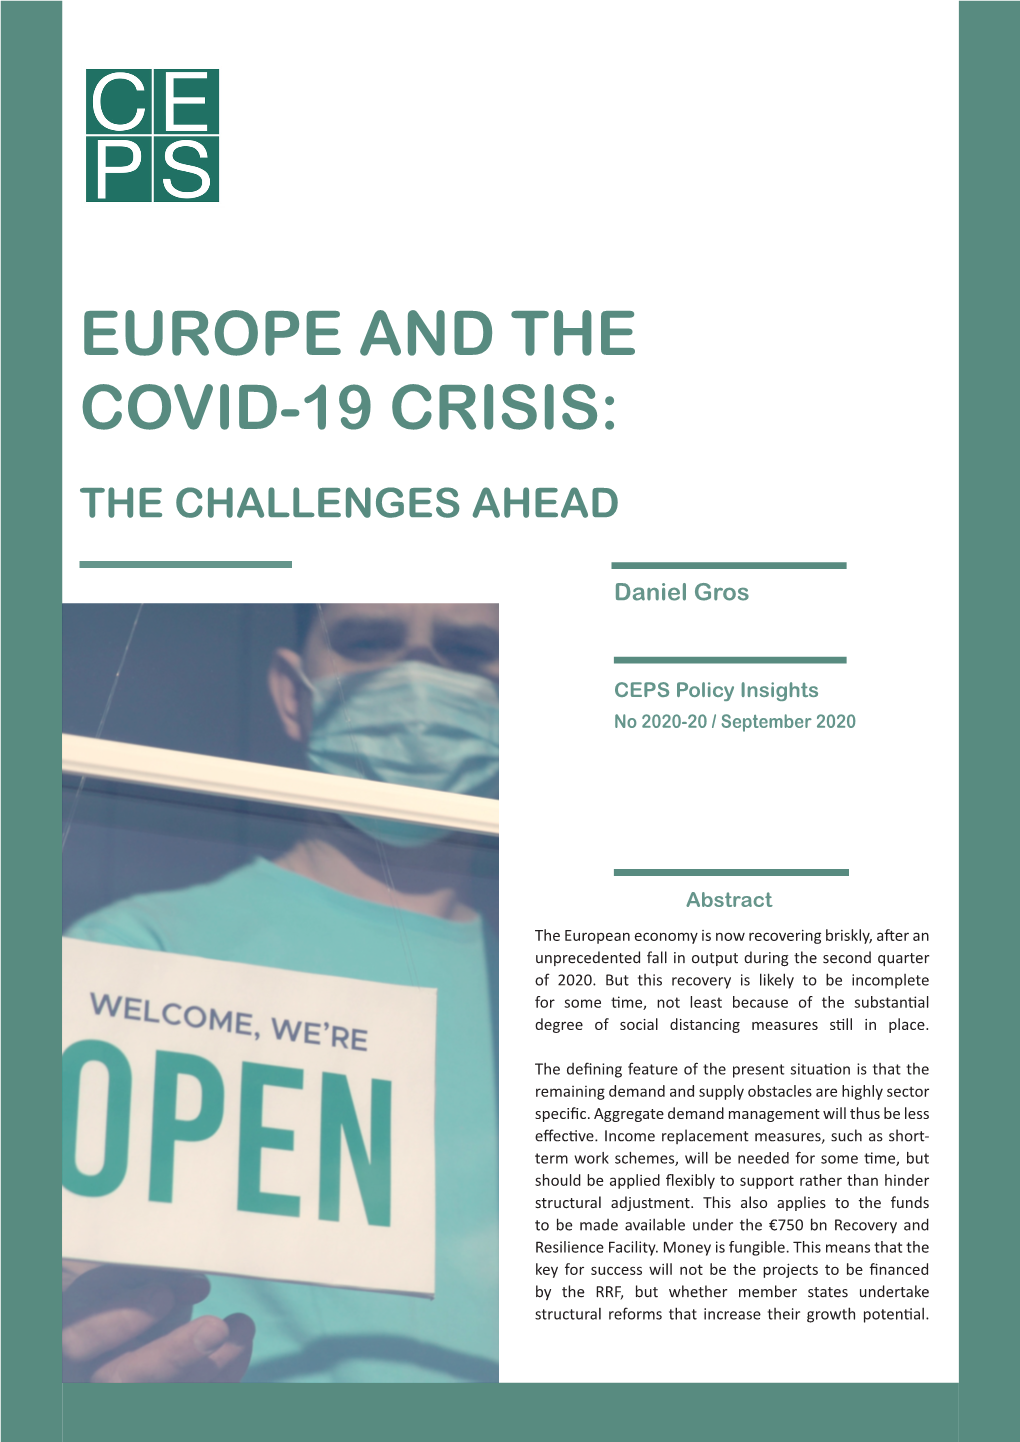 Europe and the Covid-19 Crisis